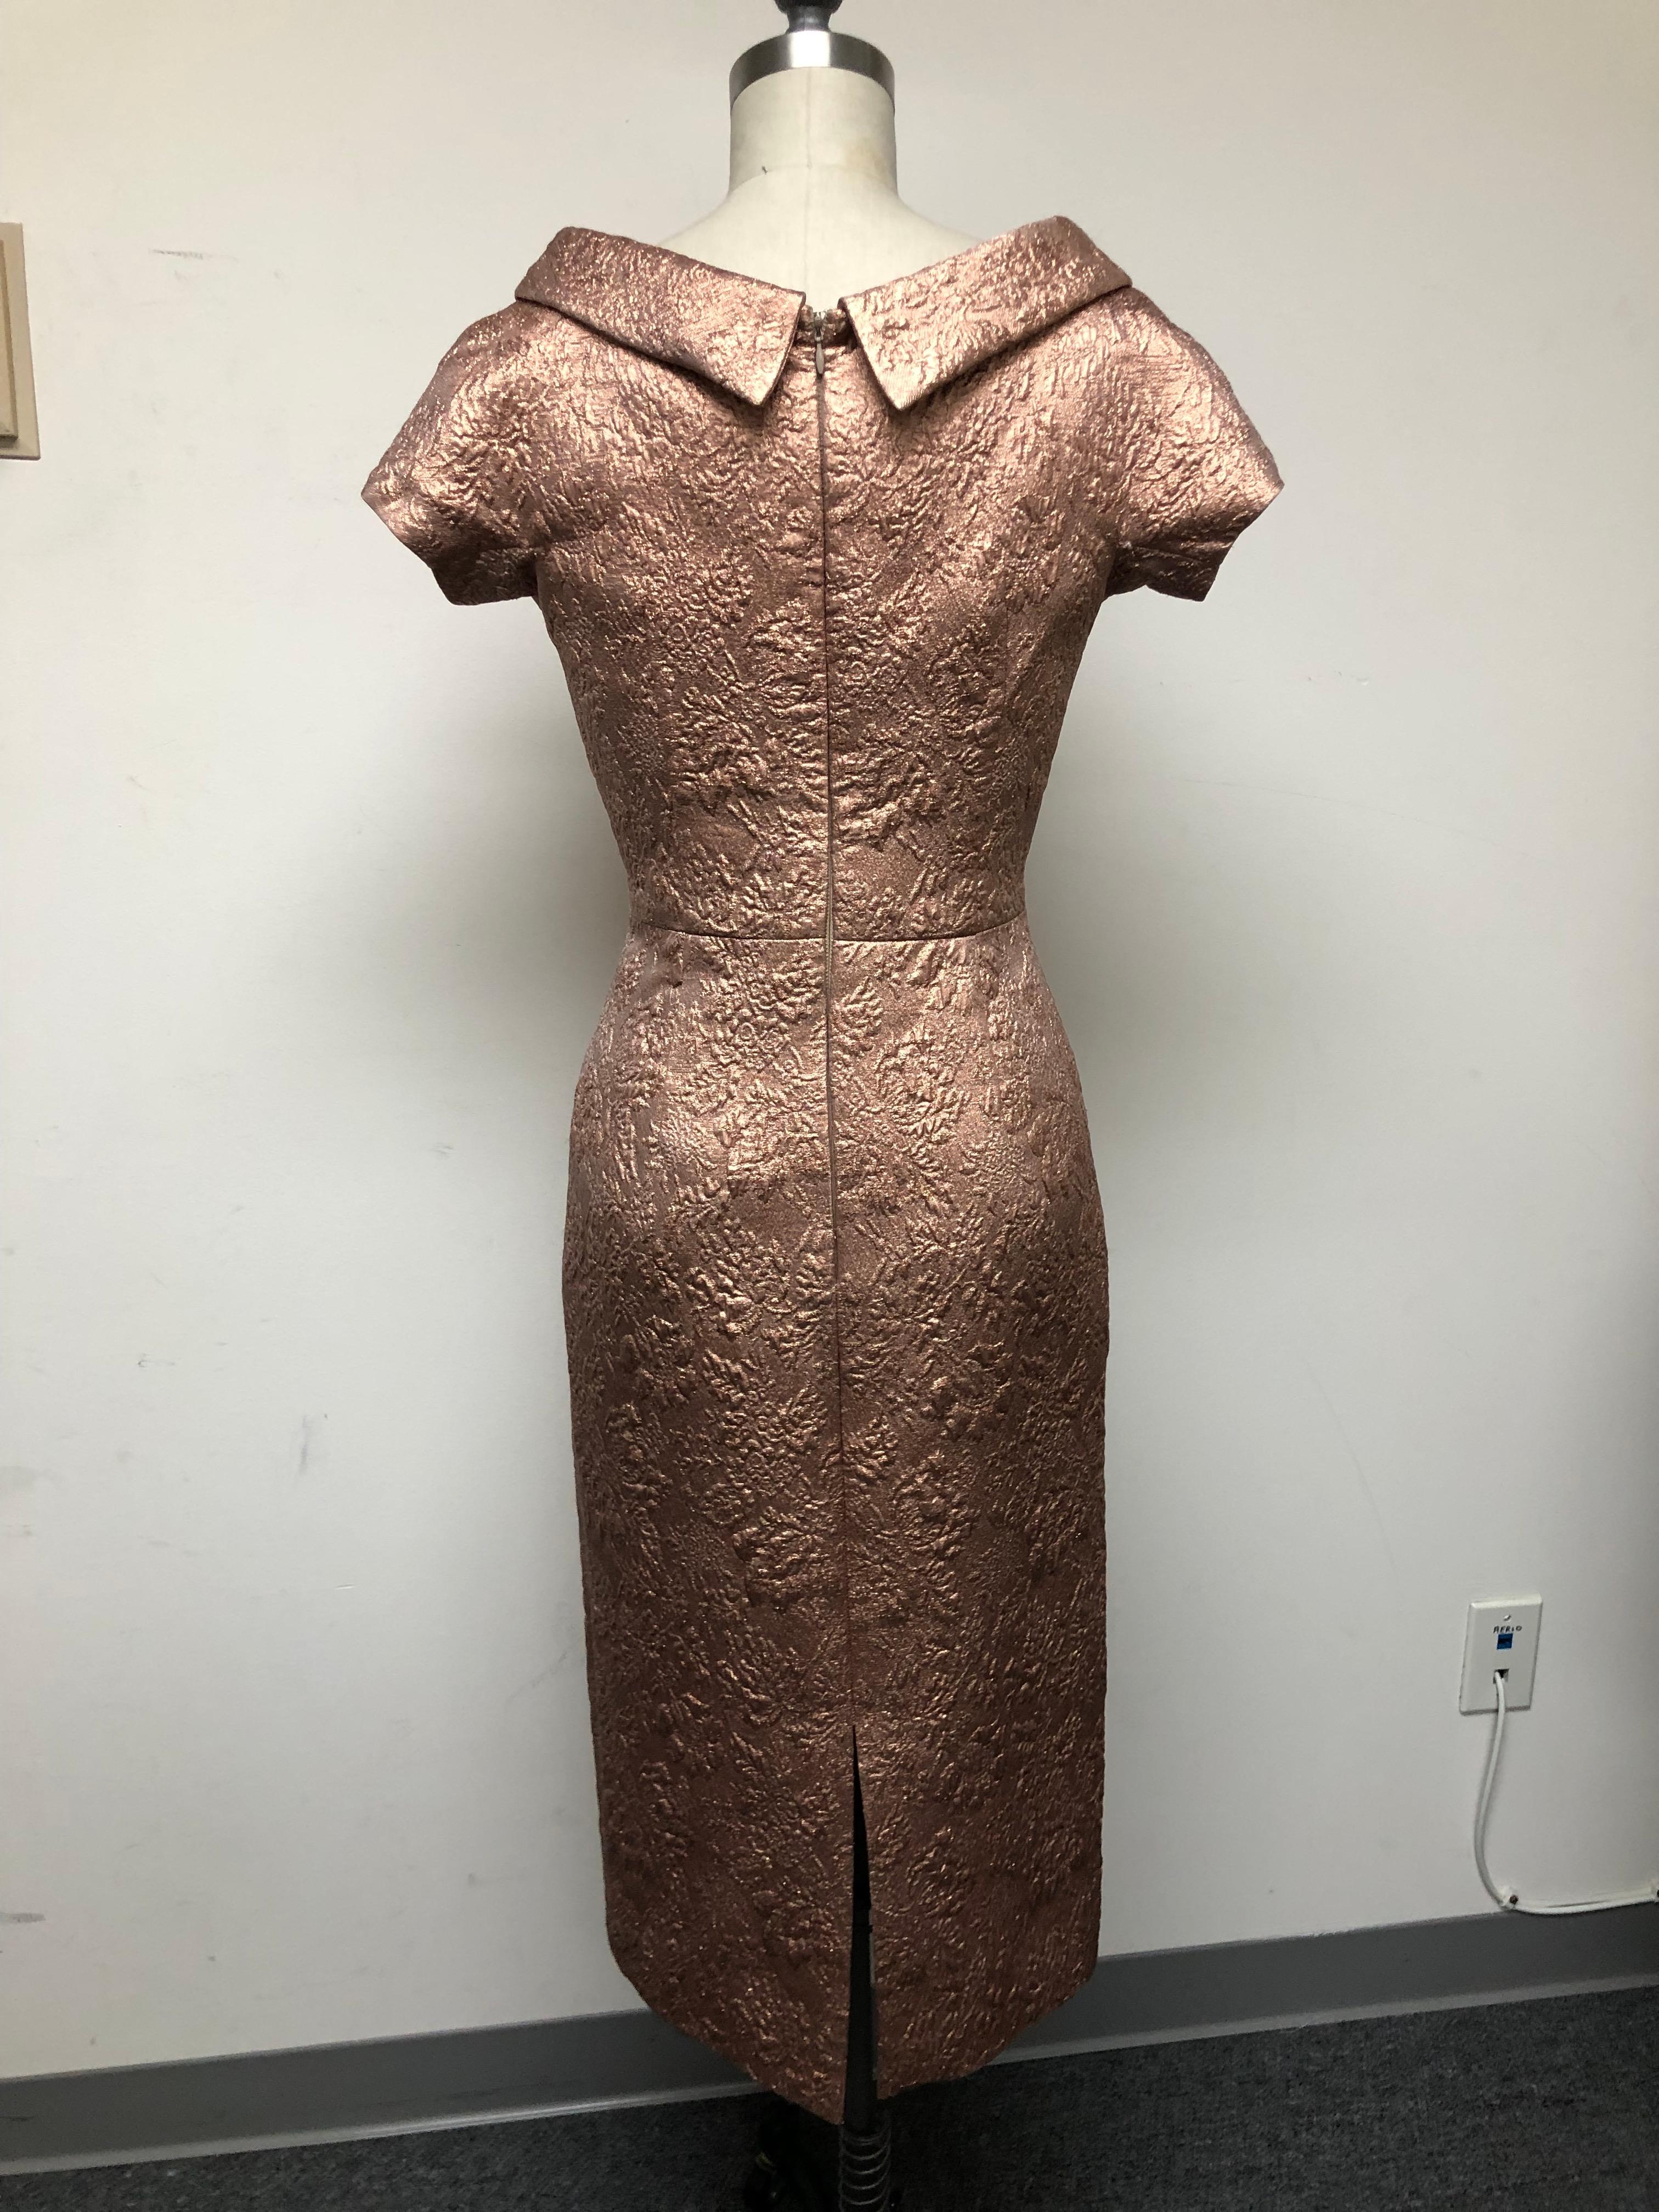 Copper French Brocade Slim Dress with Roll Collar Neckline and Cap Sleeve  In Excellent Condition For Sale In Los Angeles, CA